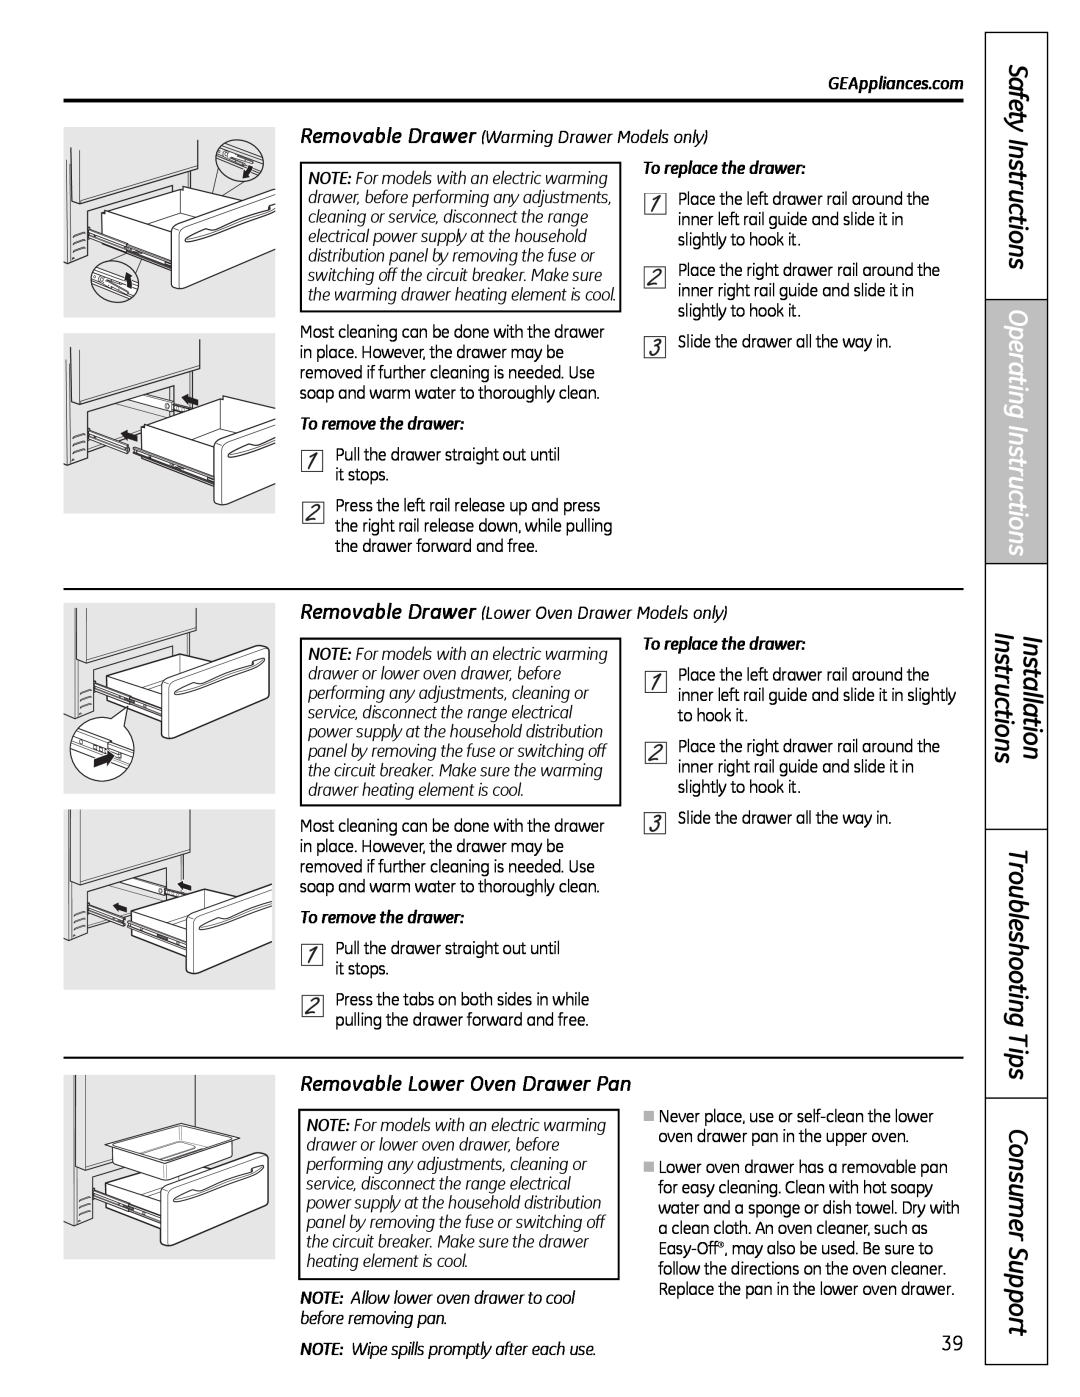 GE JGB800, JGB295, JGB805 Removable Lower Oven Drawer Pan, Safety, Instructions Operating, Installation Instructions, Tips 